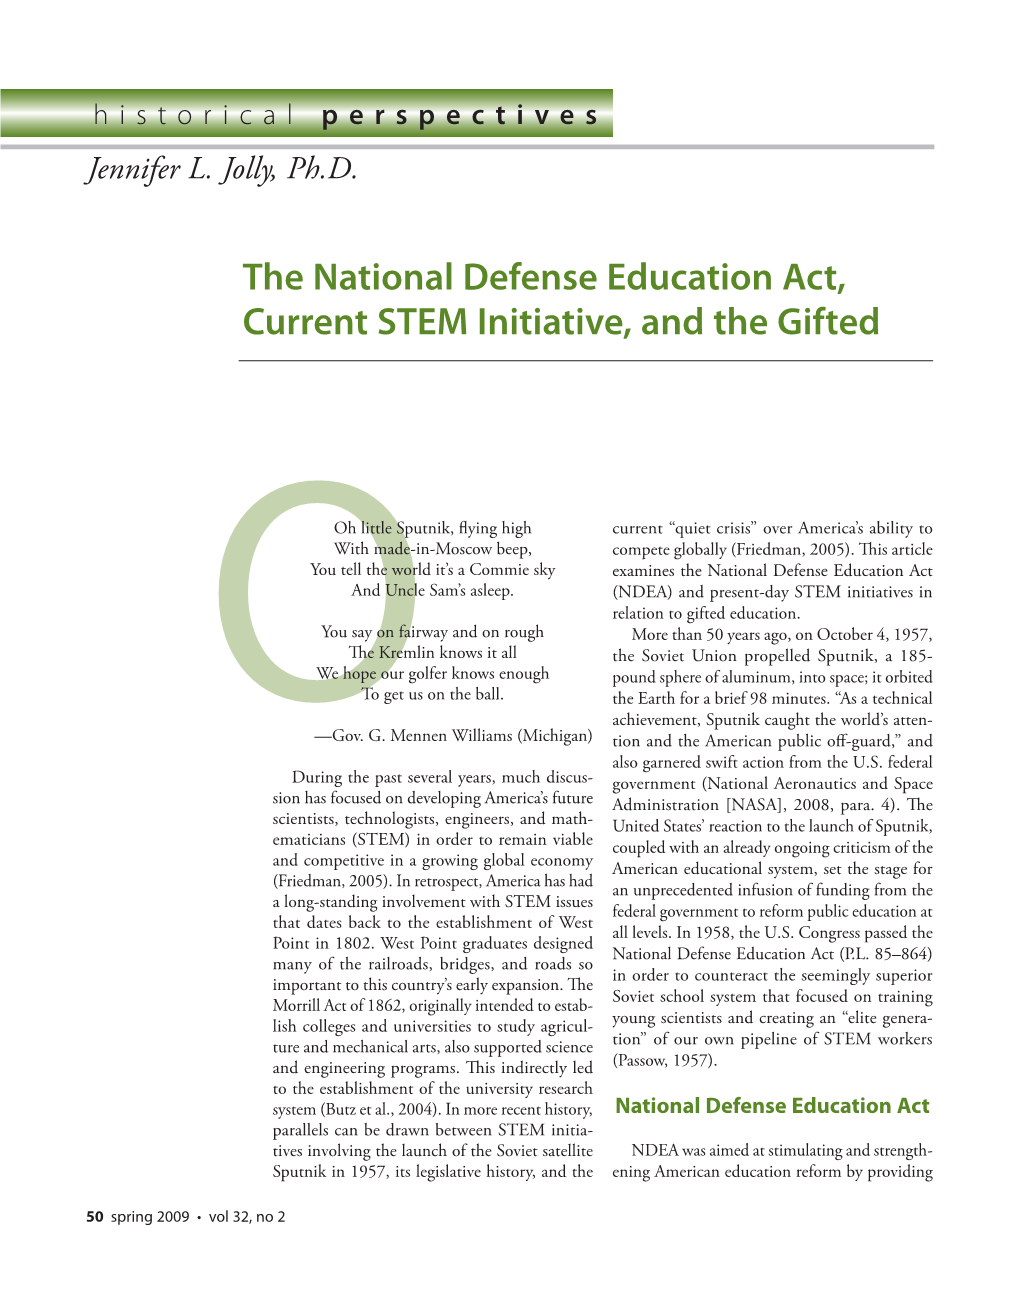 The National Defense Education Act, Current STEM Initiative, and the Gifted